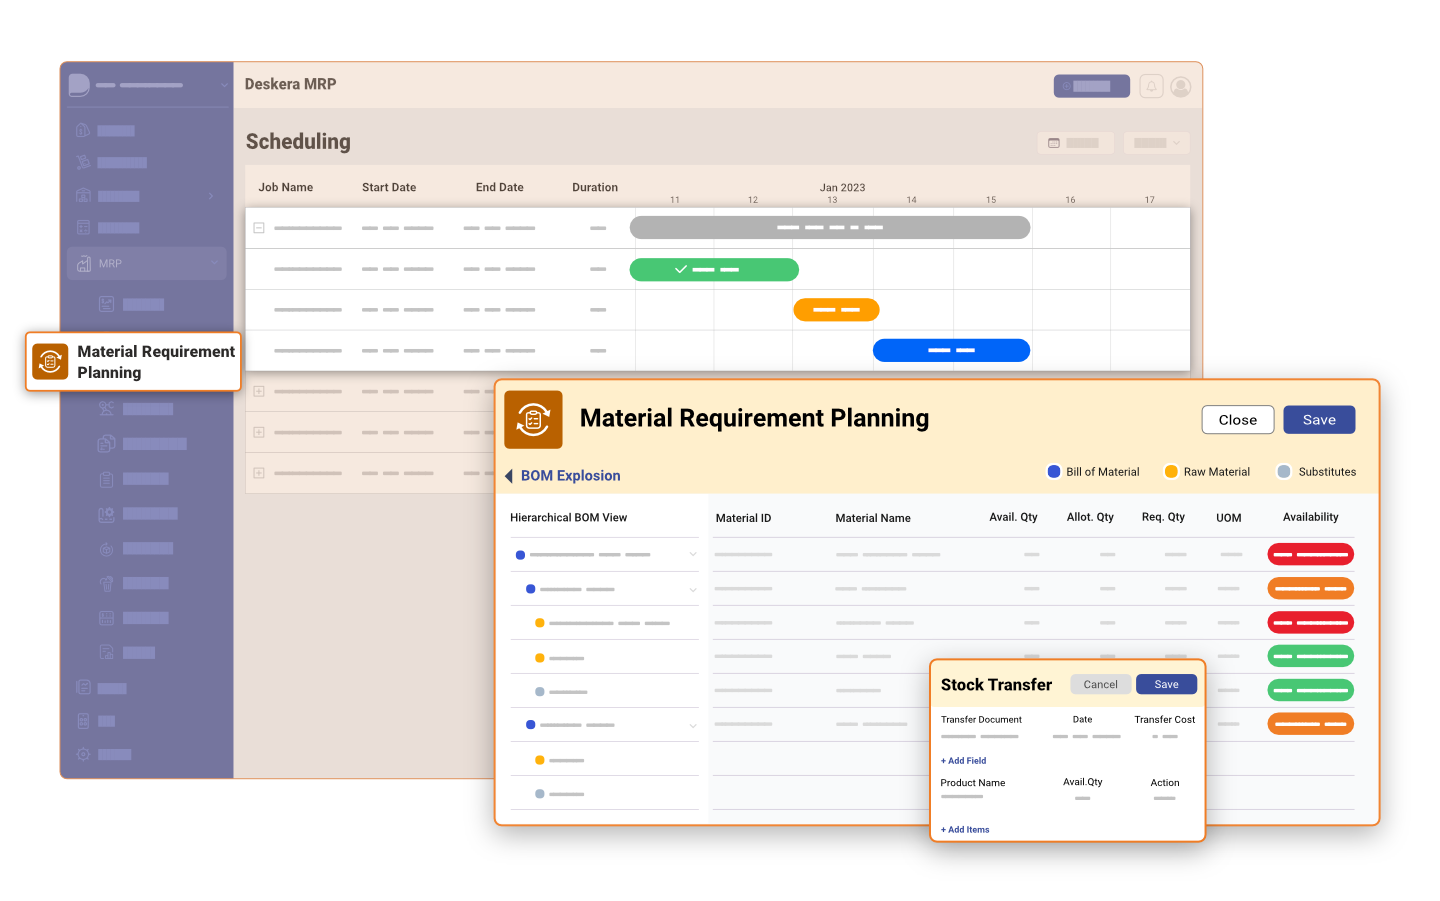 Plan and manage materials and inventory for production. Keep track of materials and components needed for production, track stock levels, plan orders, and optimize purchasing and production processes